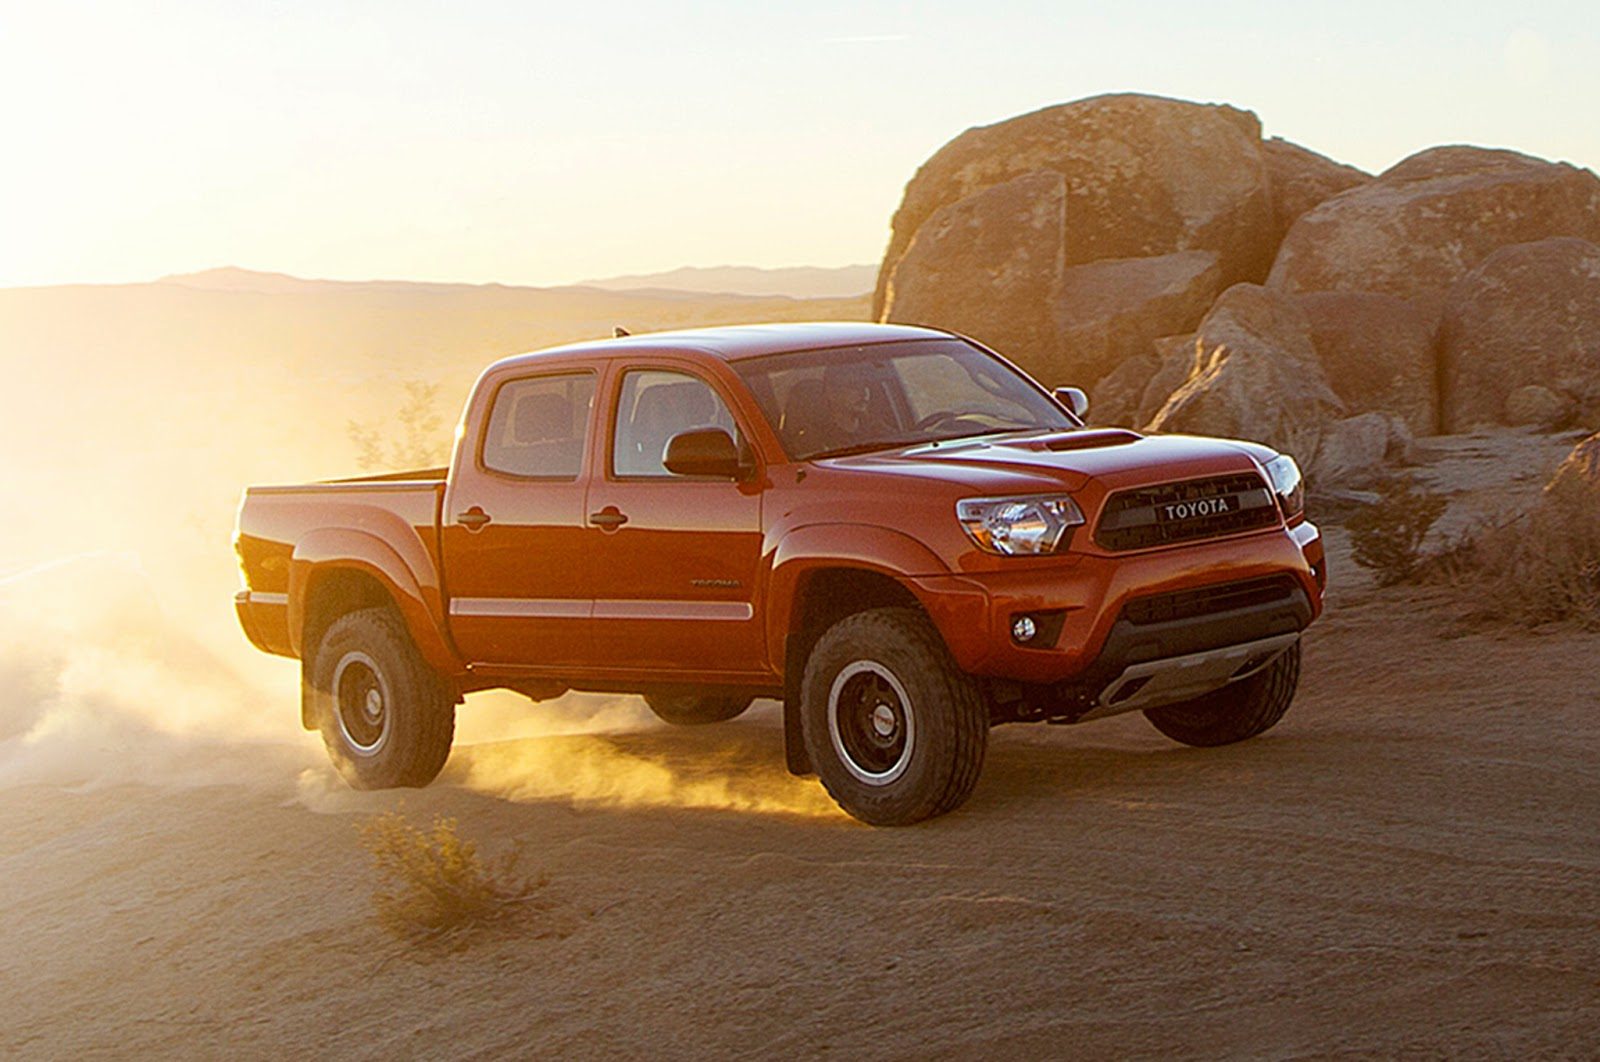 2015+Toyota+Tundra+TRD+Pro+Series+-+Review+and+Pictures+(3).jpg